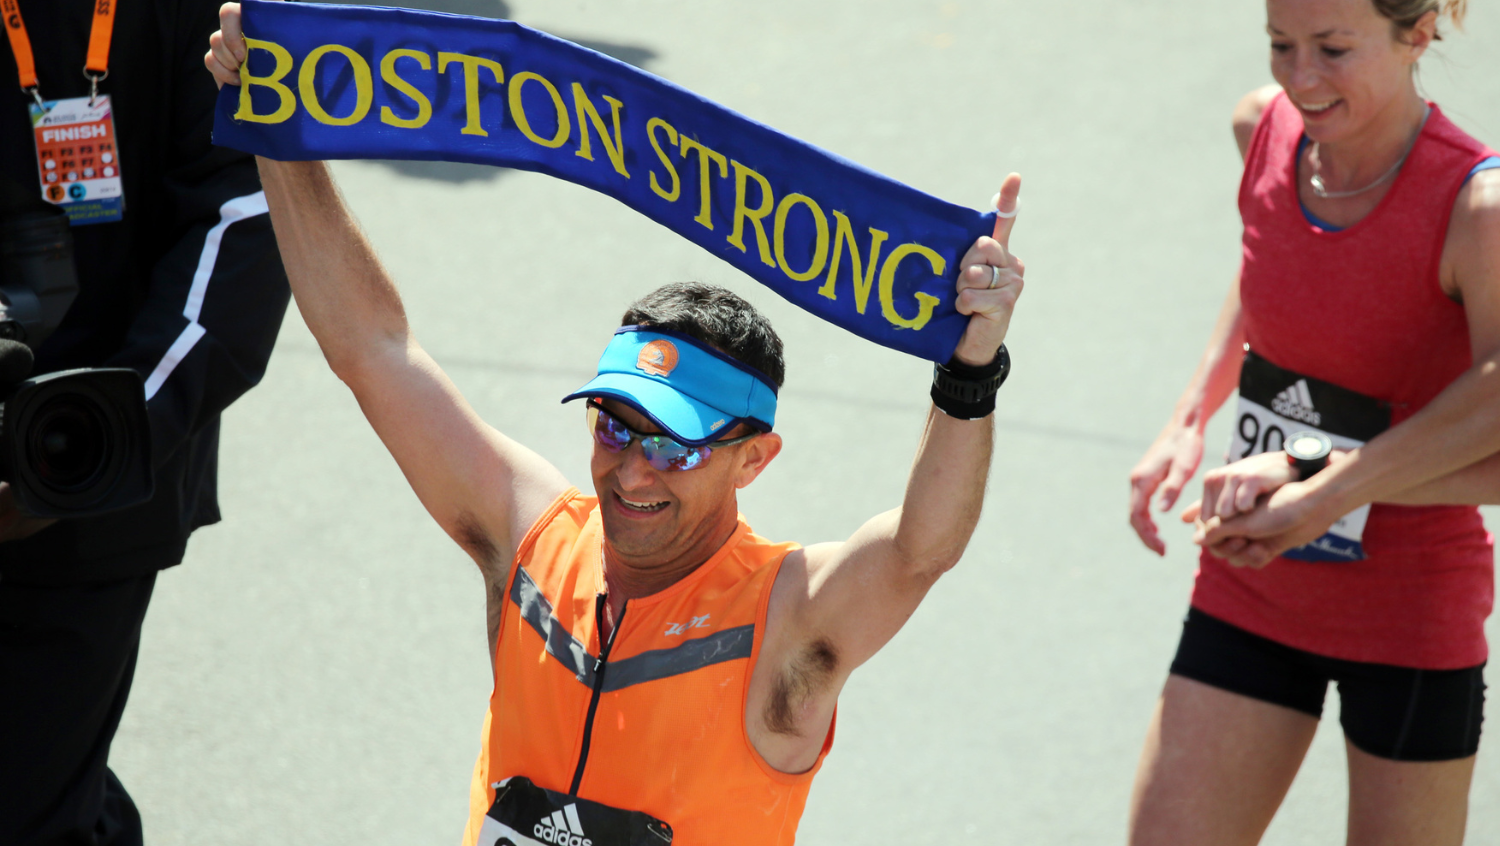 a man is running in an orange outfit, carrying a sign "boston strong"